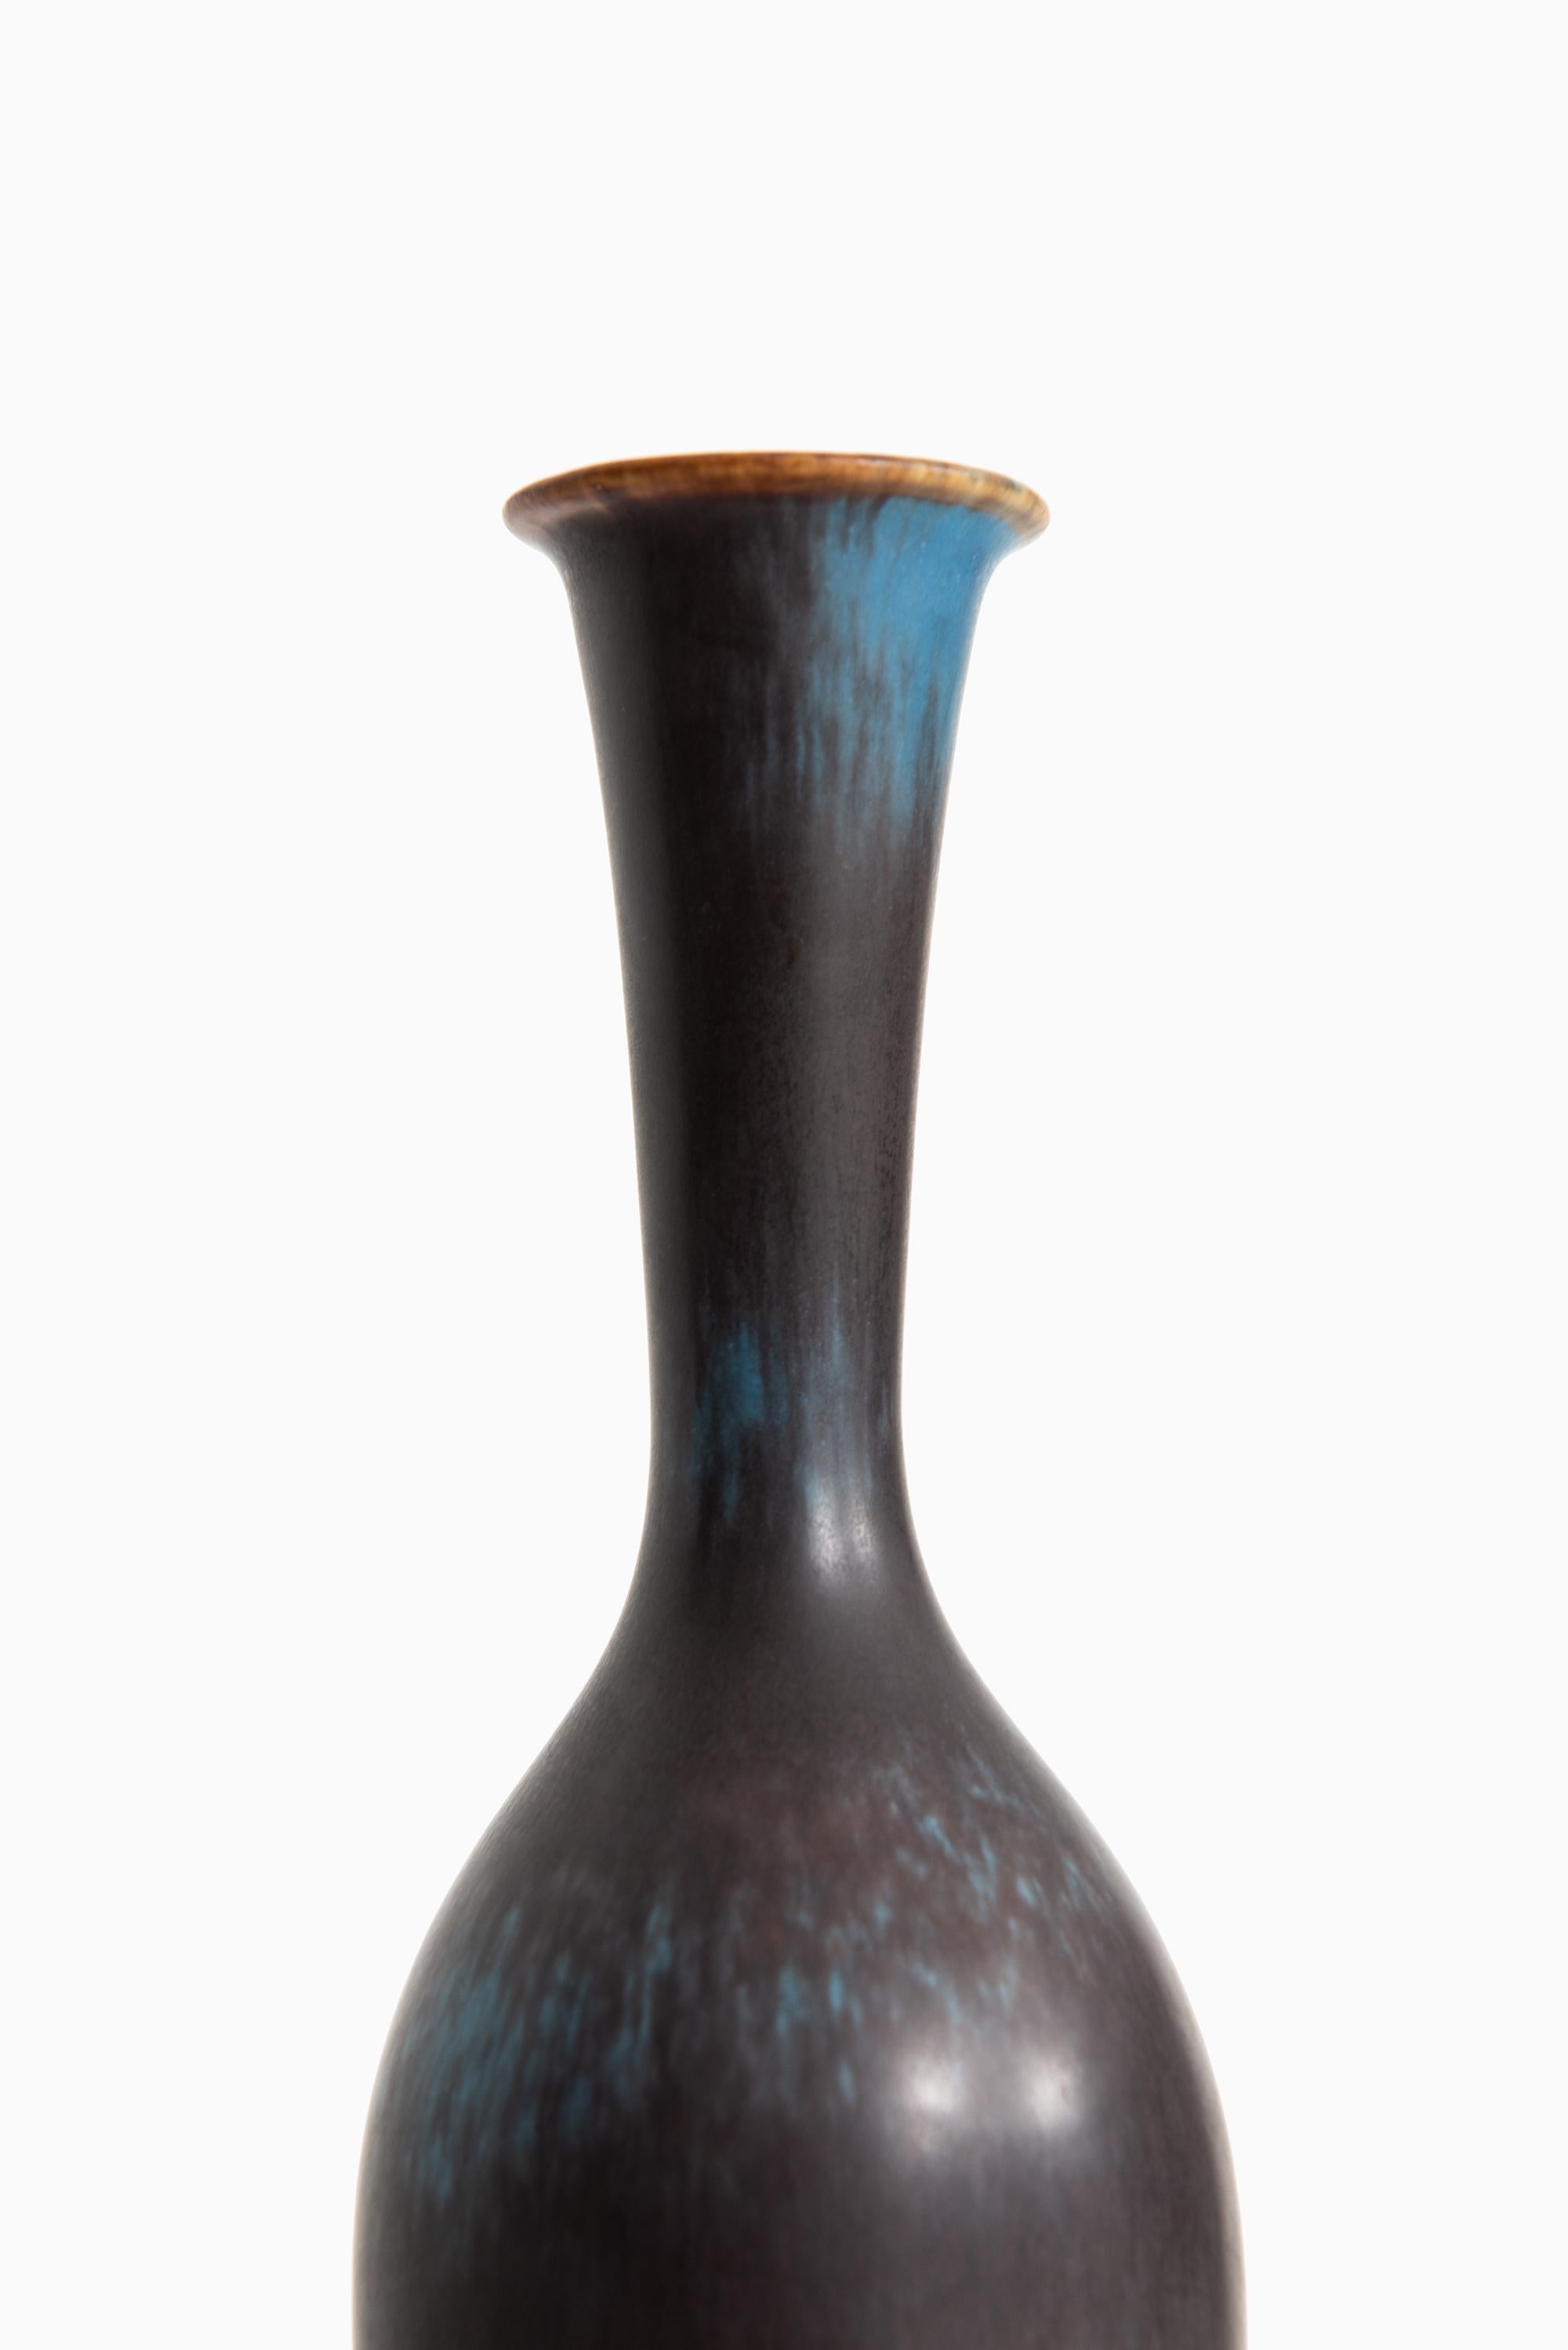 Gunnar Nylund Vase Produced by Rörstrand in Sweden In Good Condition For Sale In Limhamn, Skåne län